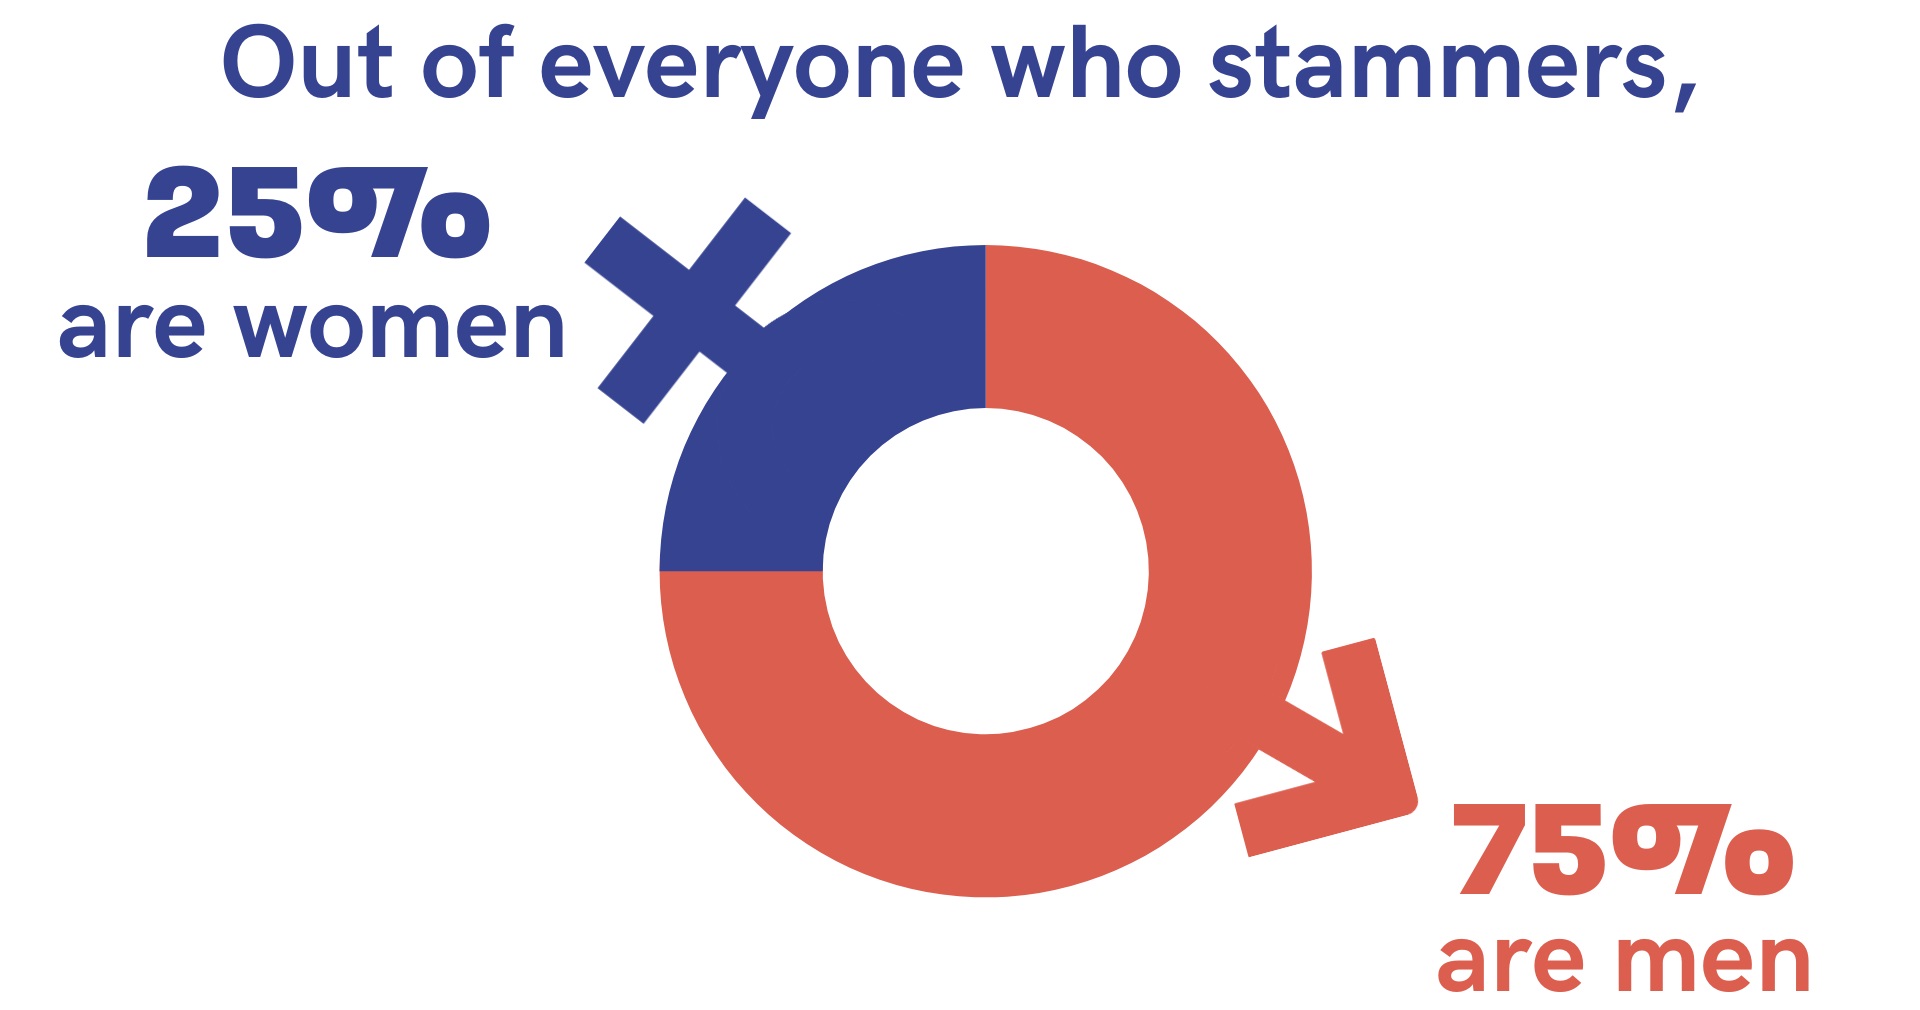 An infographic showing a pie chart, under text saying 'Out of everyone who stammers, 25% are women, 75% are men'.